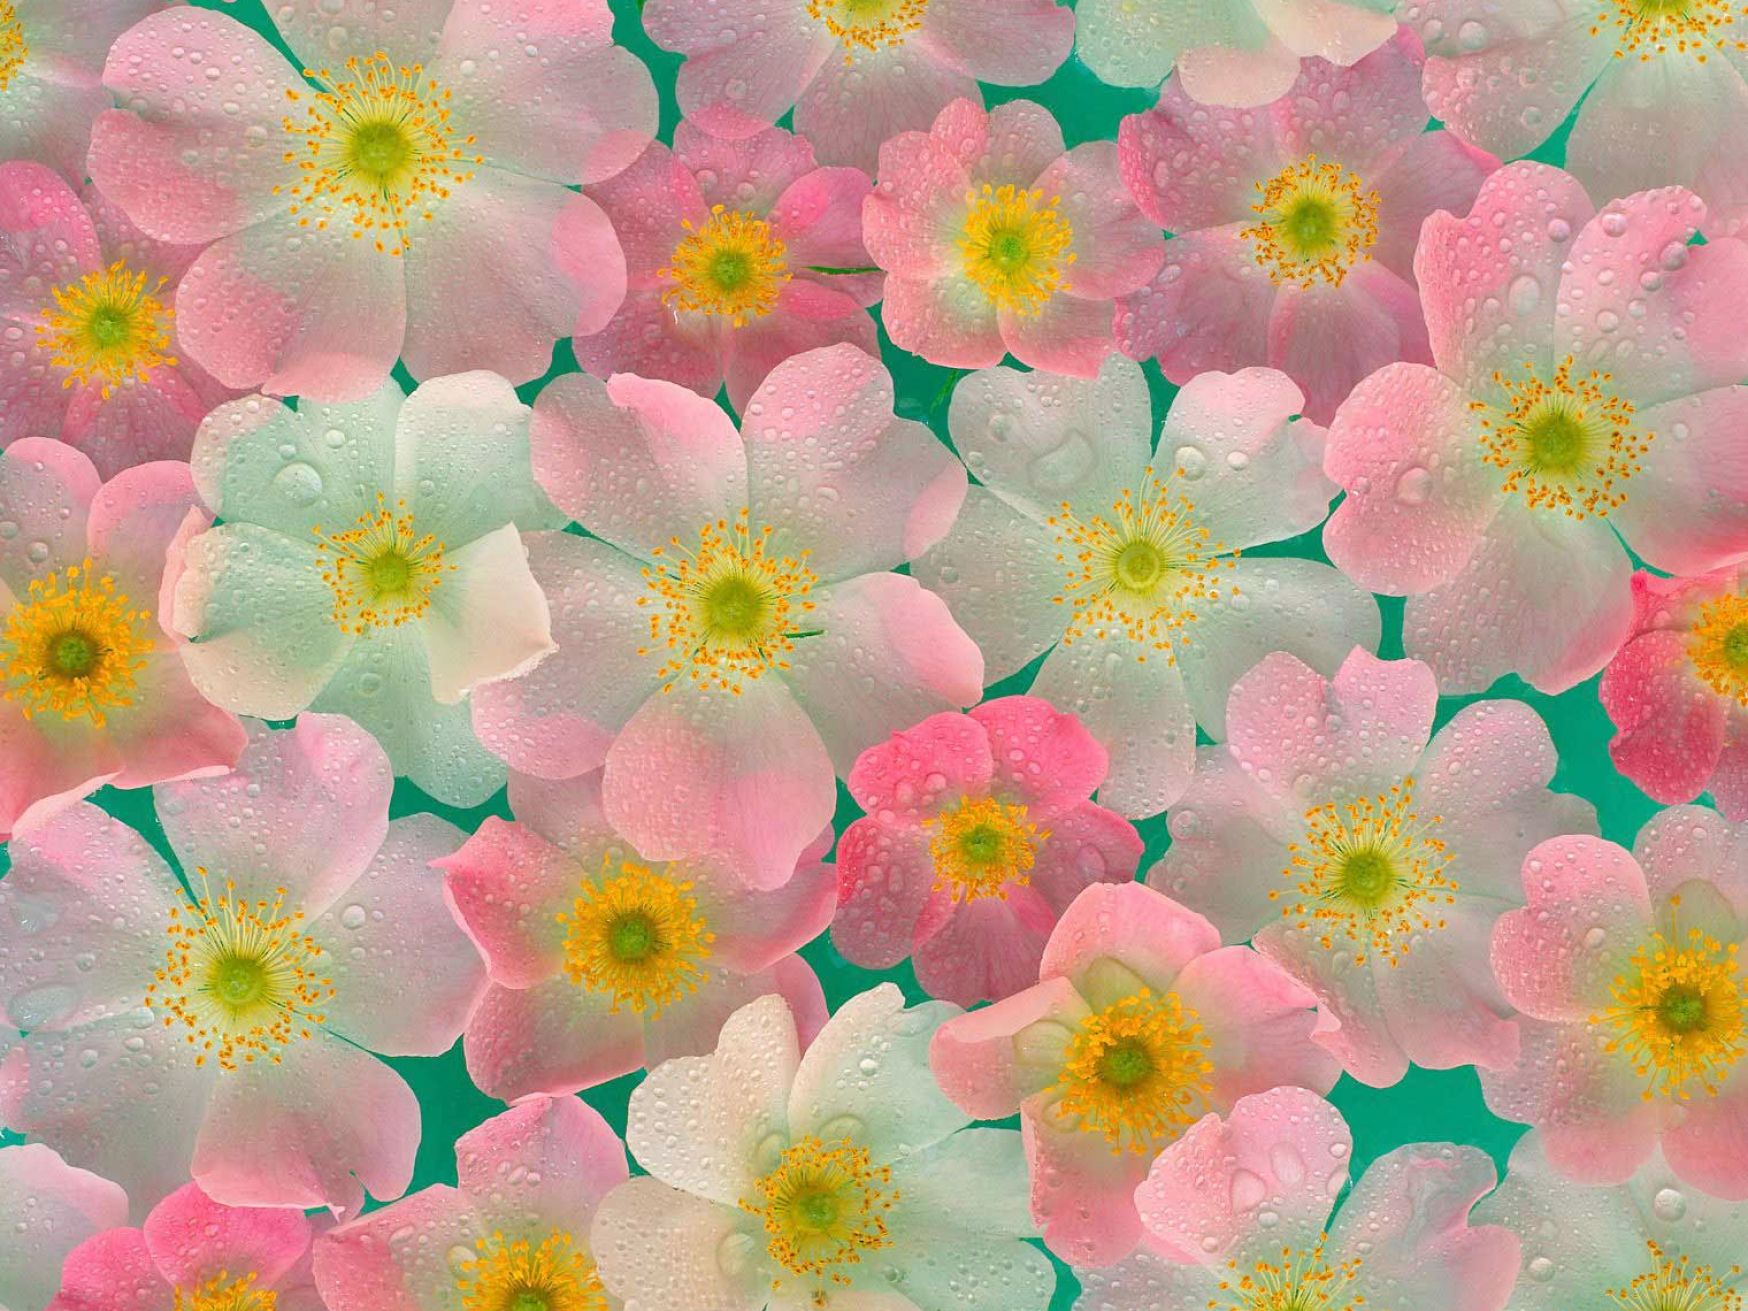 Image Of Flowers For Desktop Pictures